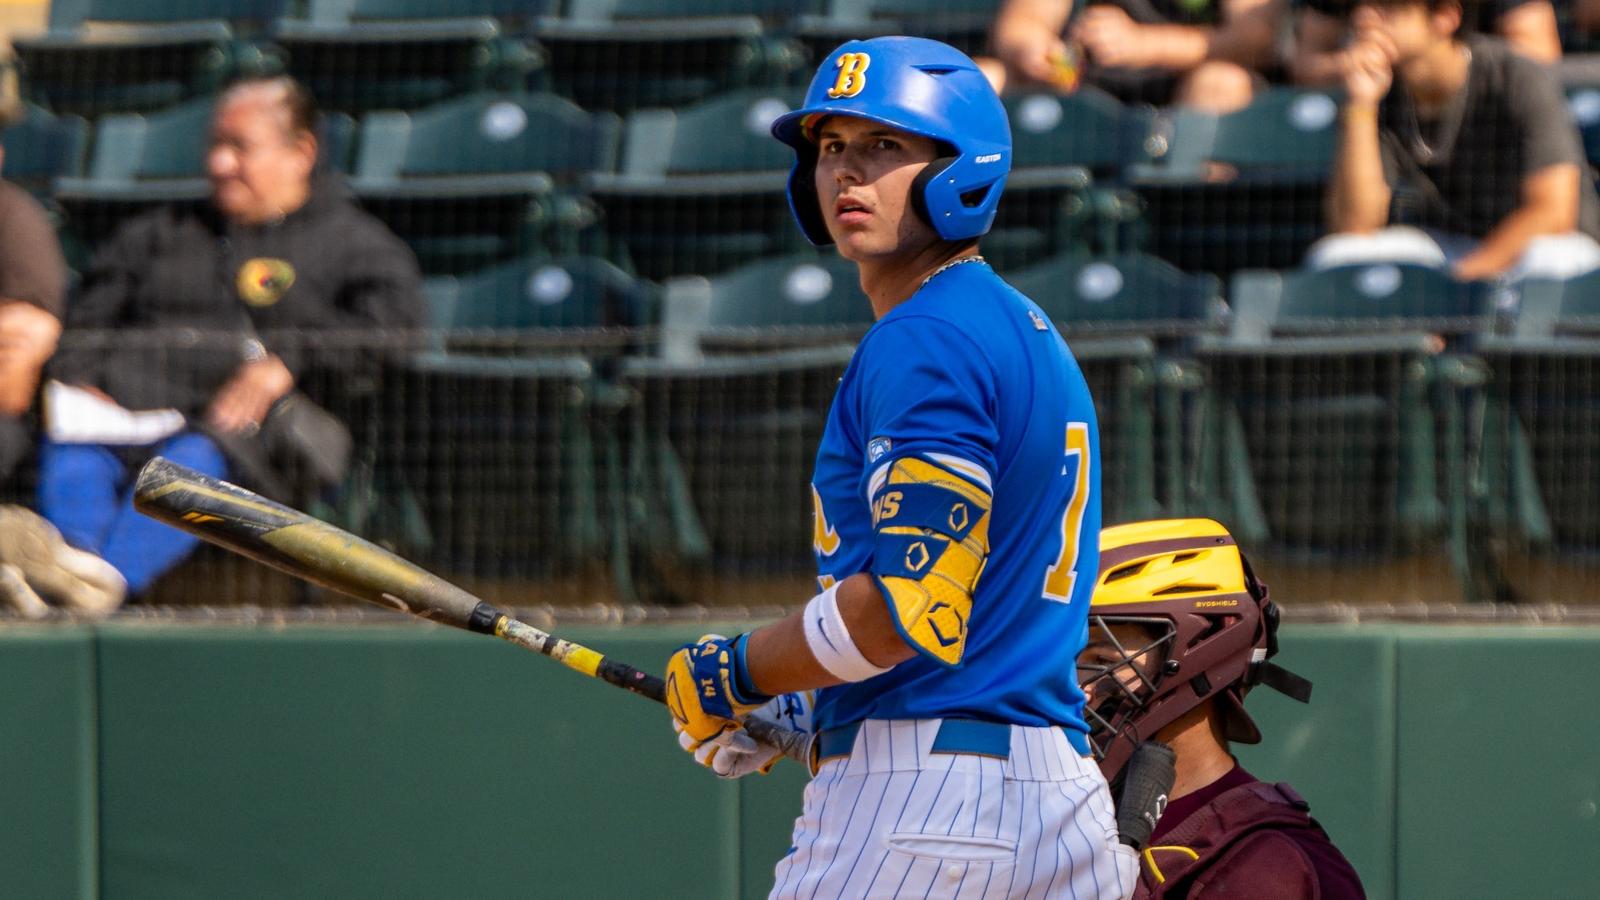 UCLA Baseball Faces Utah in Crucial Pac-12 Series: Stats, Players, and Major Wins Revealed